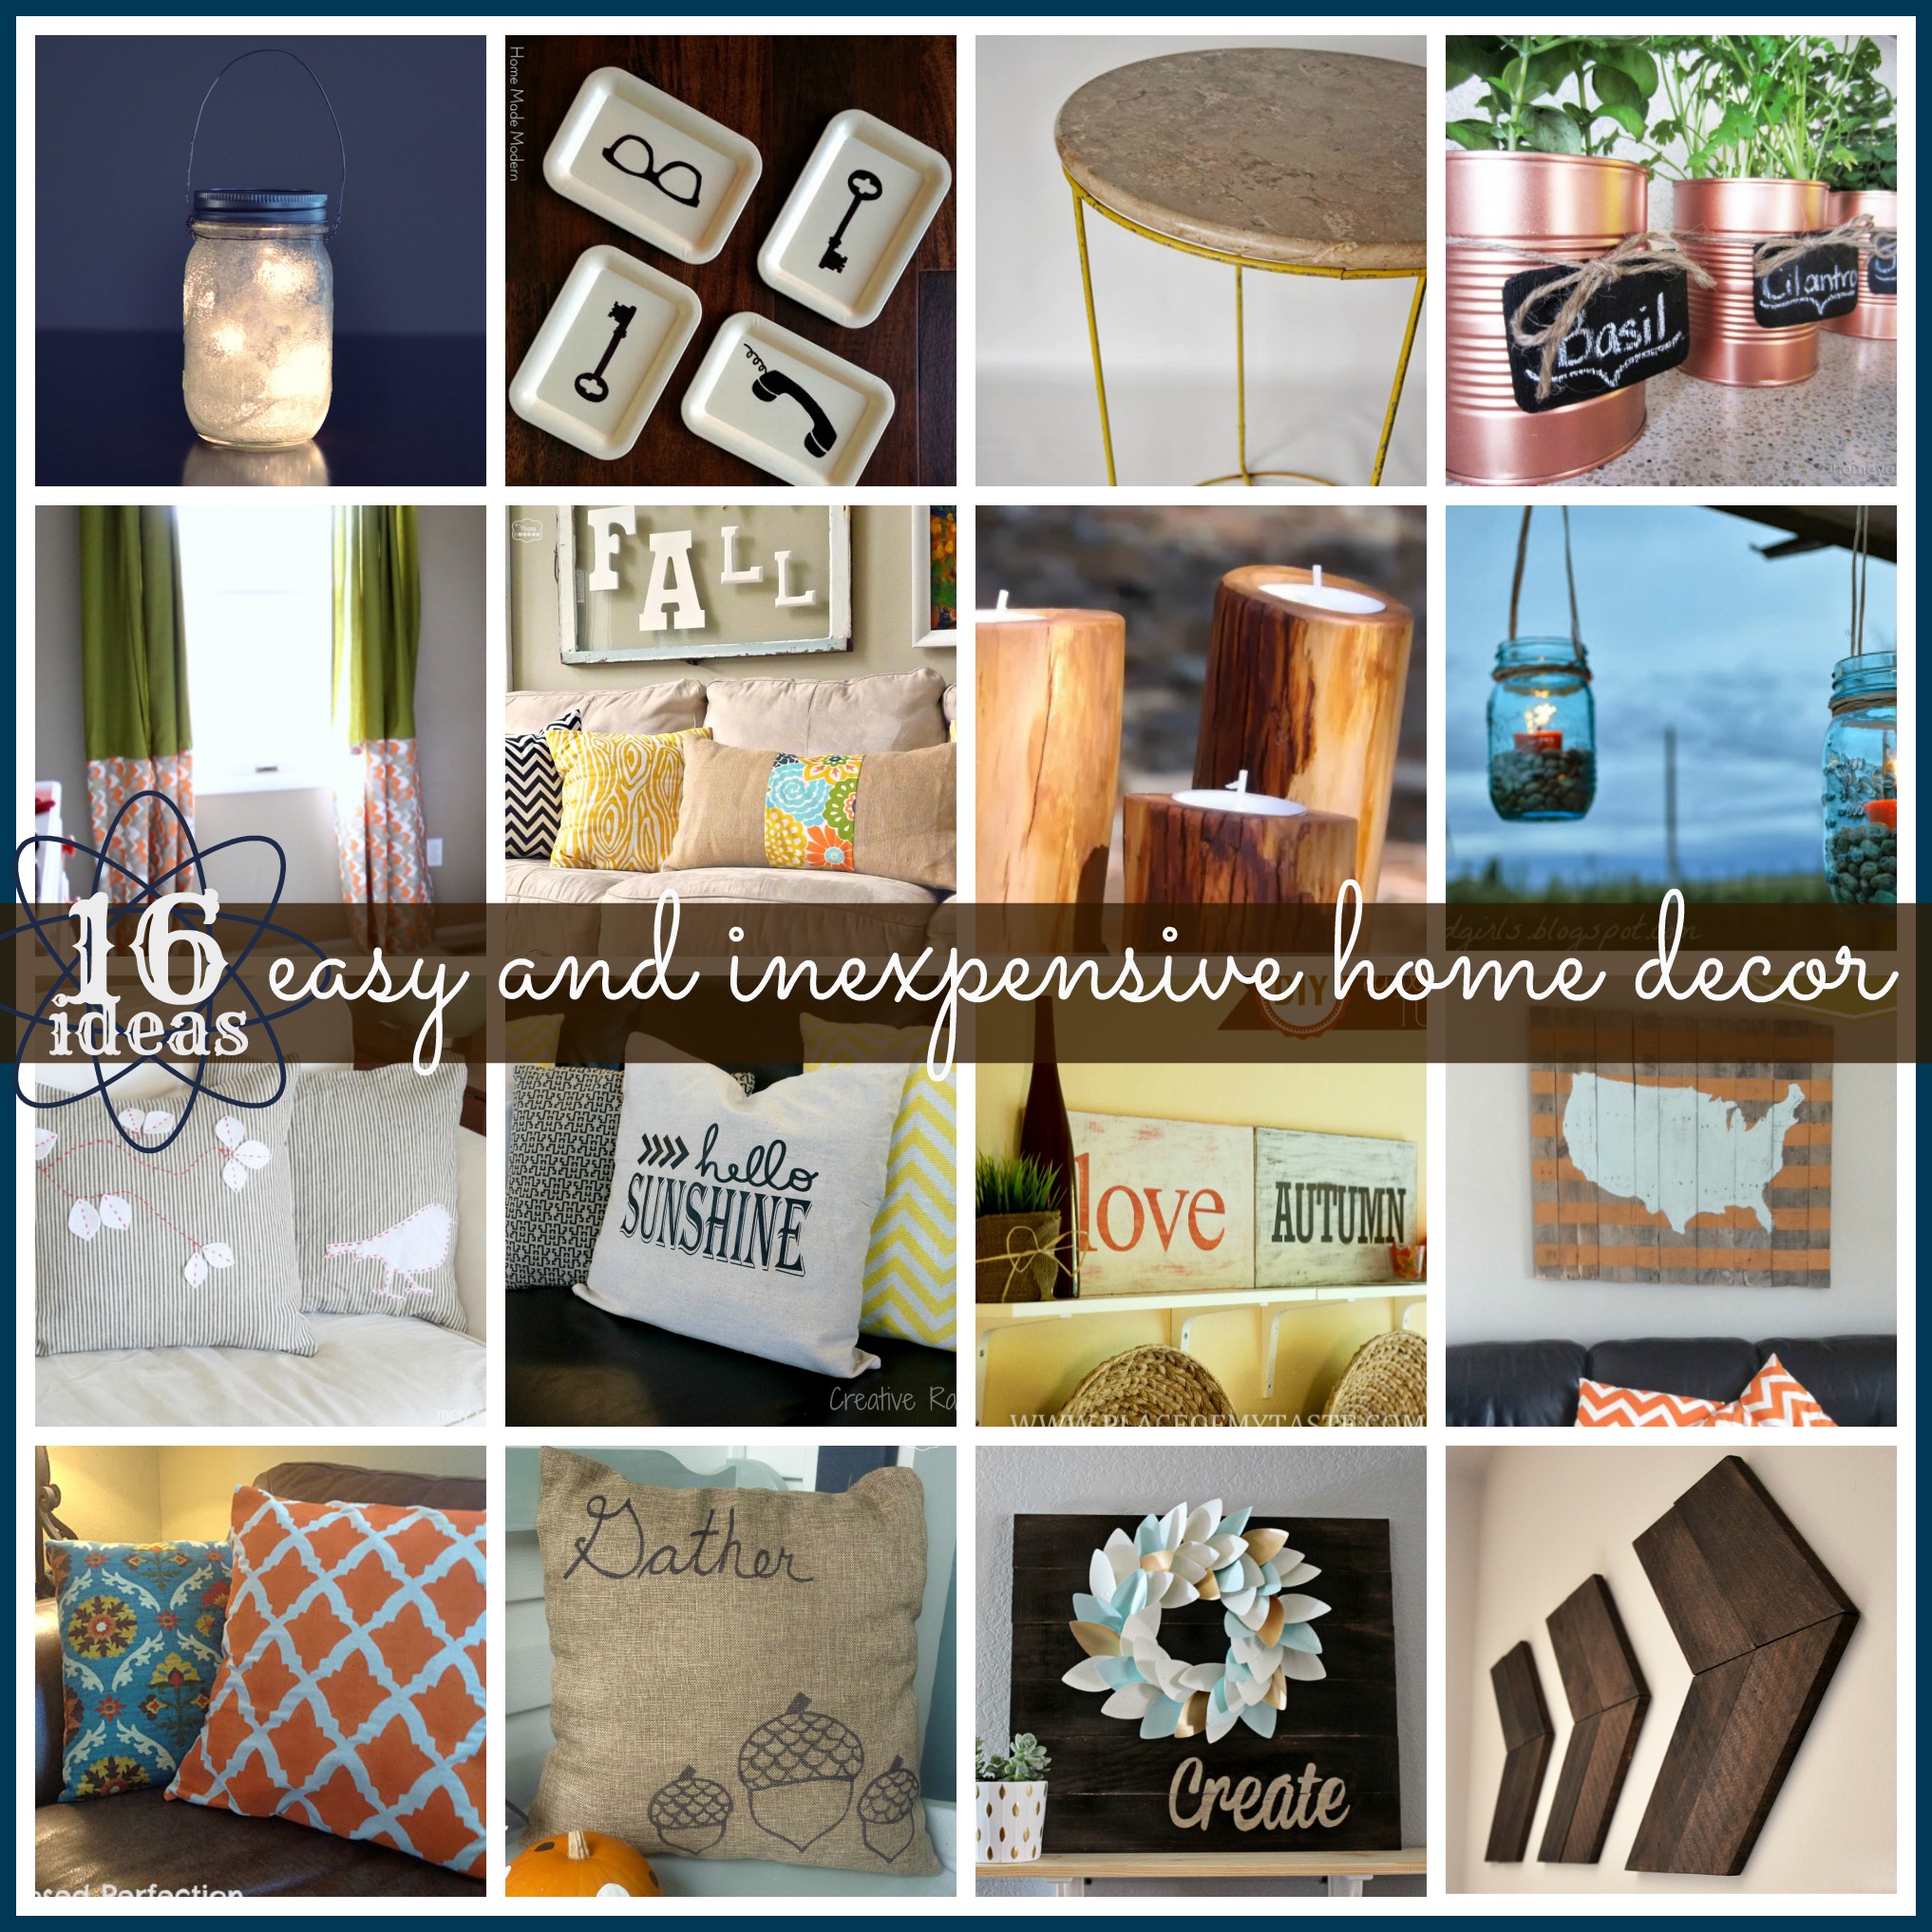 16 Easy Home Decor Ideas for inspiration after the holidays! #features #homedecor